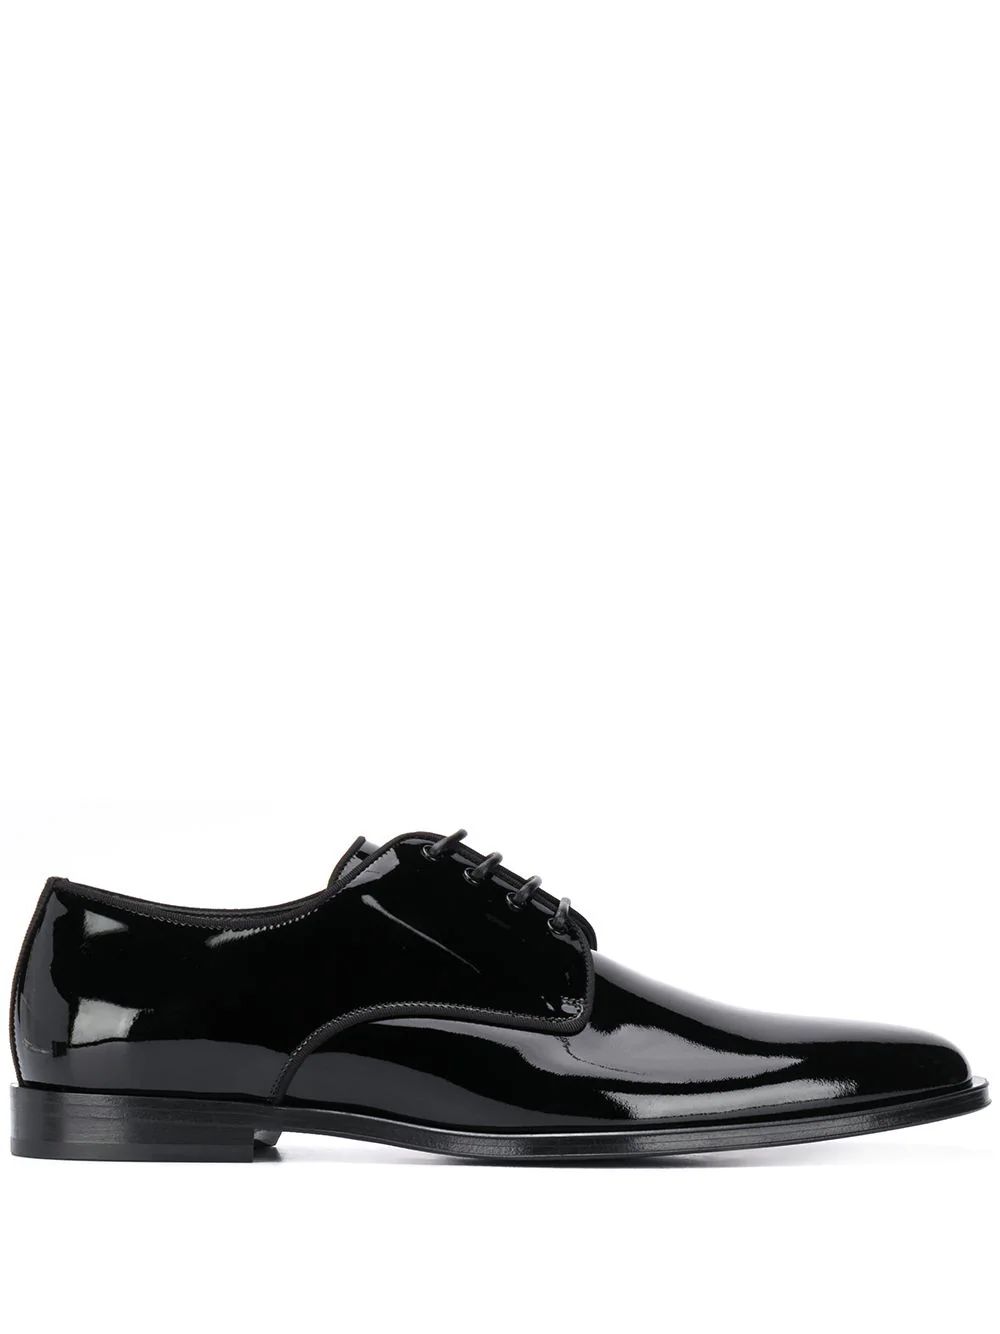 The DetailsDolce & Gabbanapatent leather derby shoesElegance never goes out of style. Detailed wi... | Farfetch Global